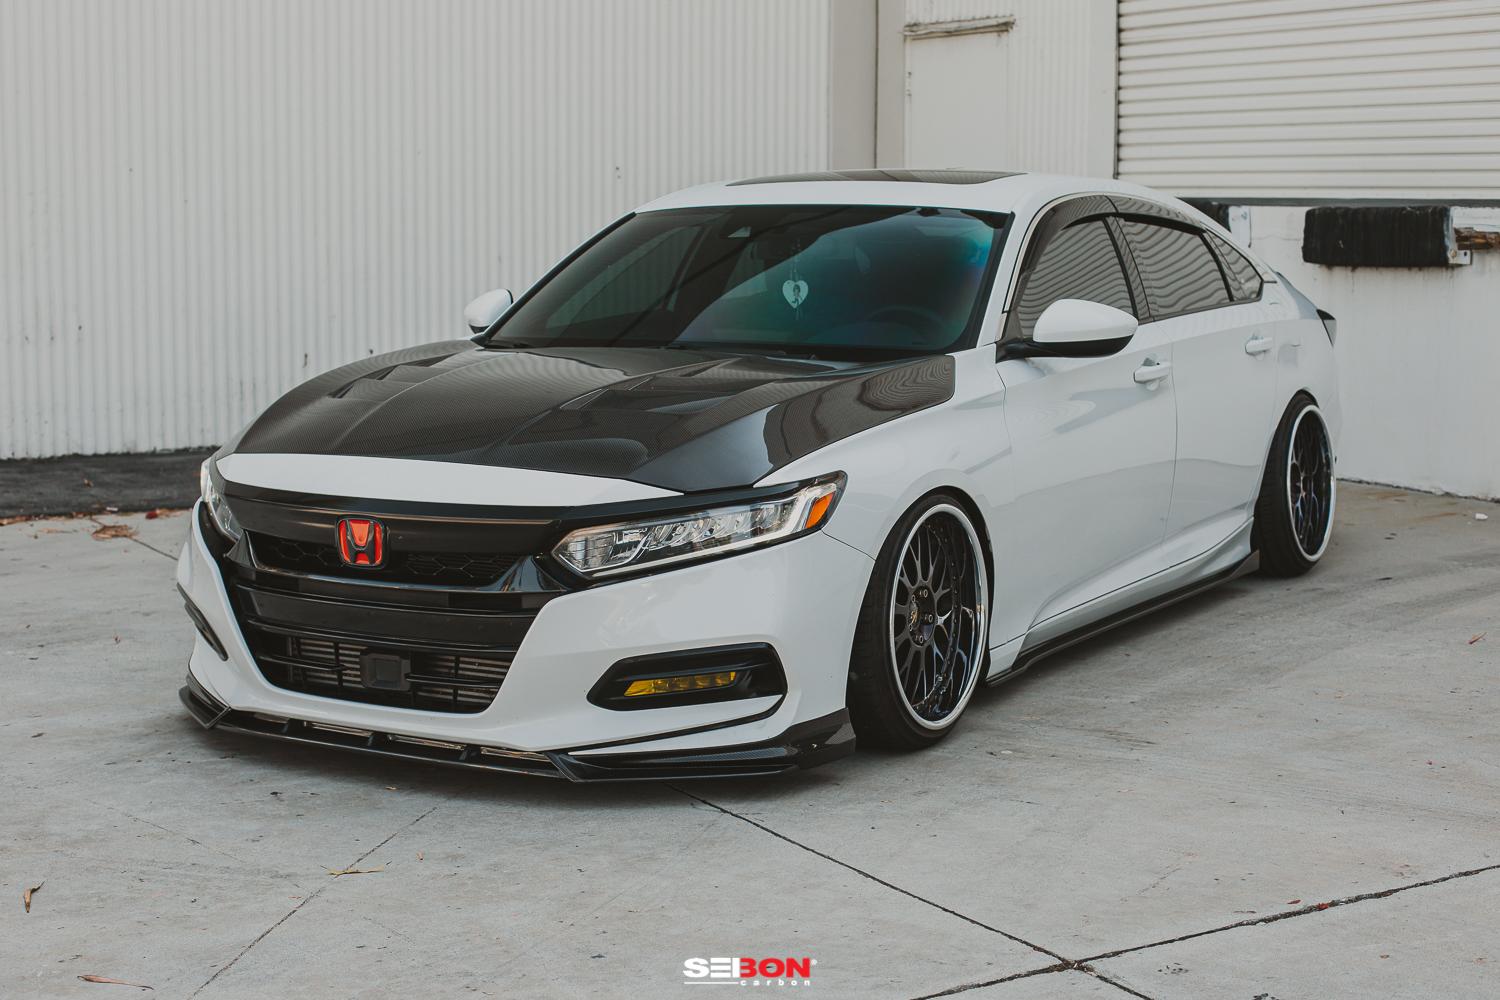 New Products: GC-Style Carbon Fiber Lip Kit for 10th Gen Honda Accord